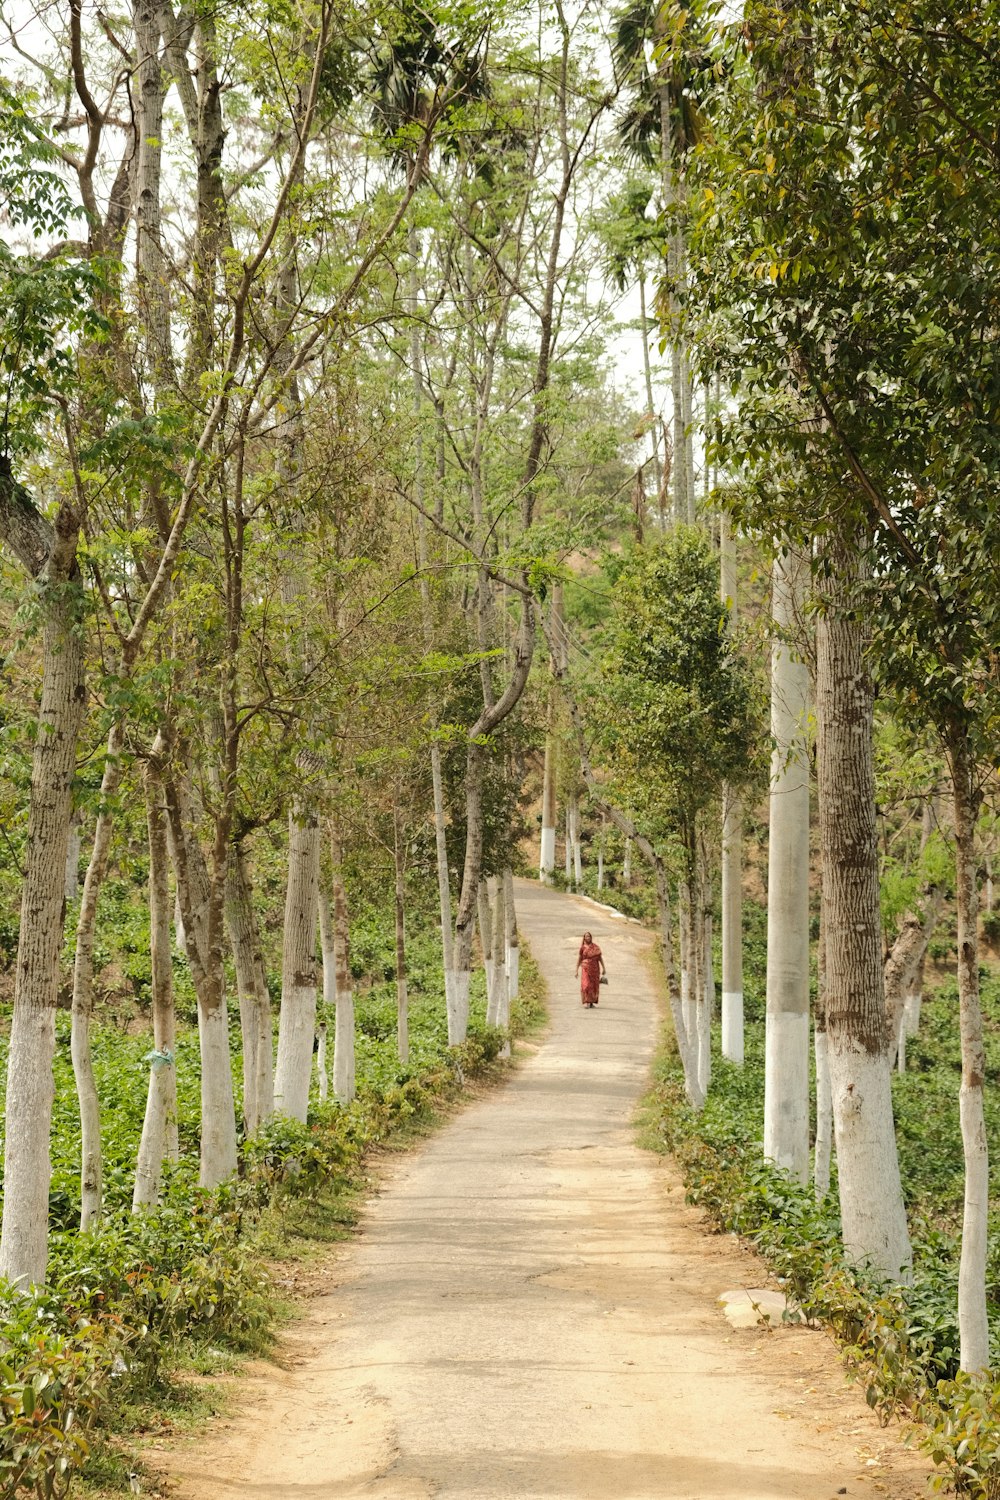 a person walking down a dirt road in the middle of a forest